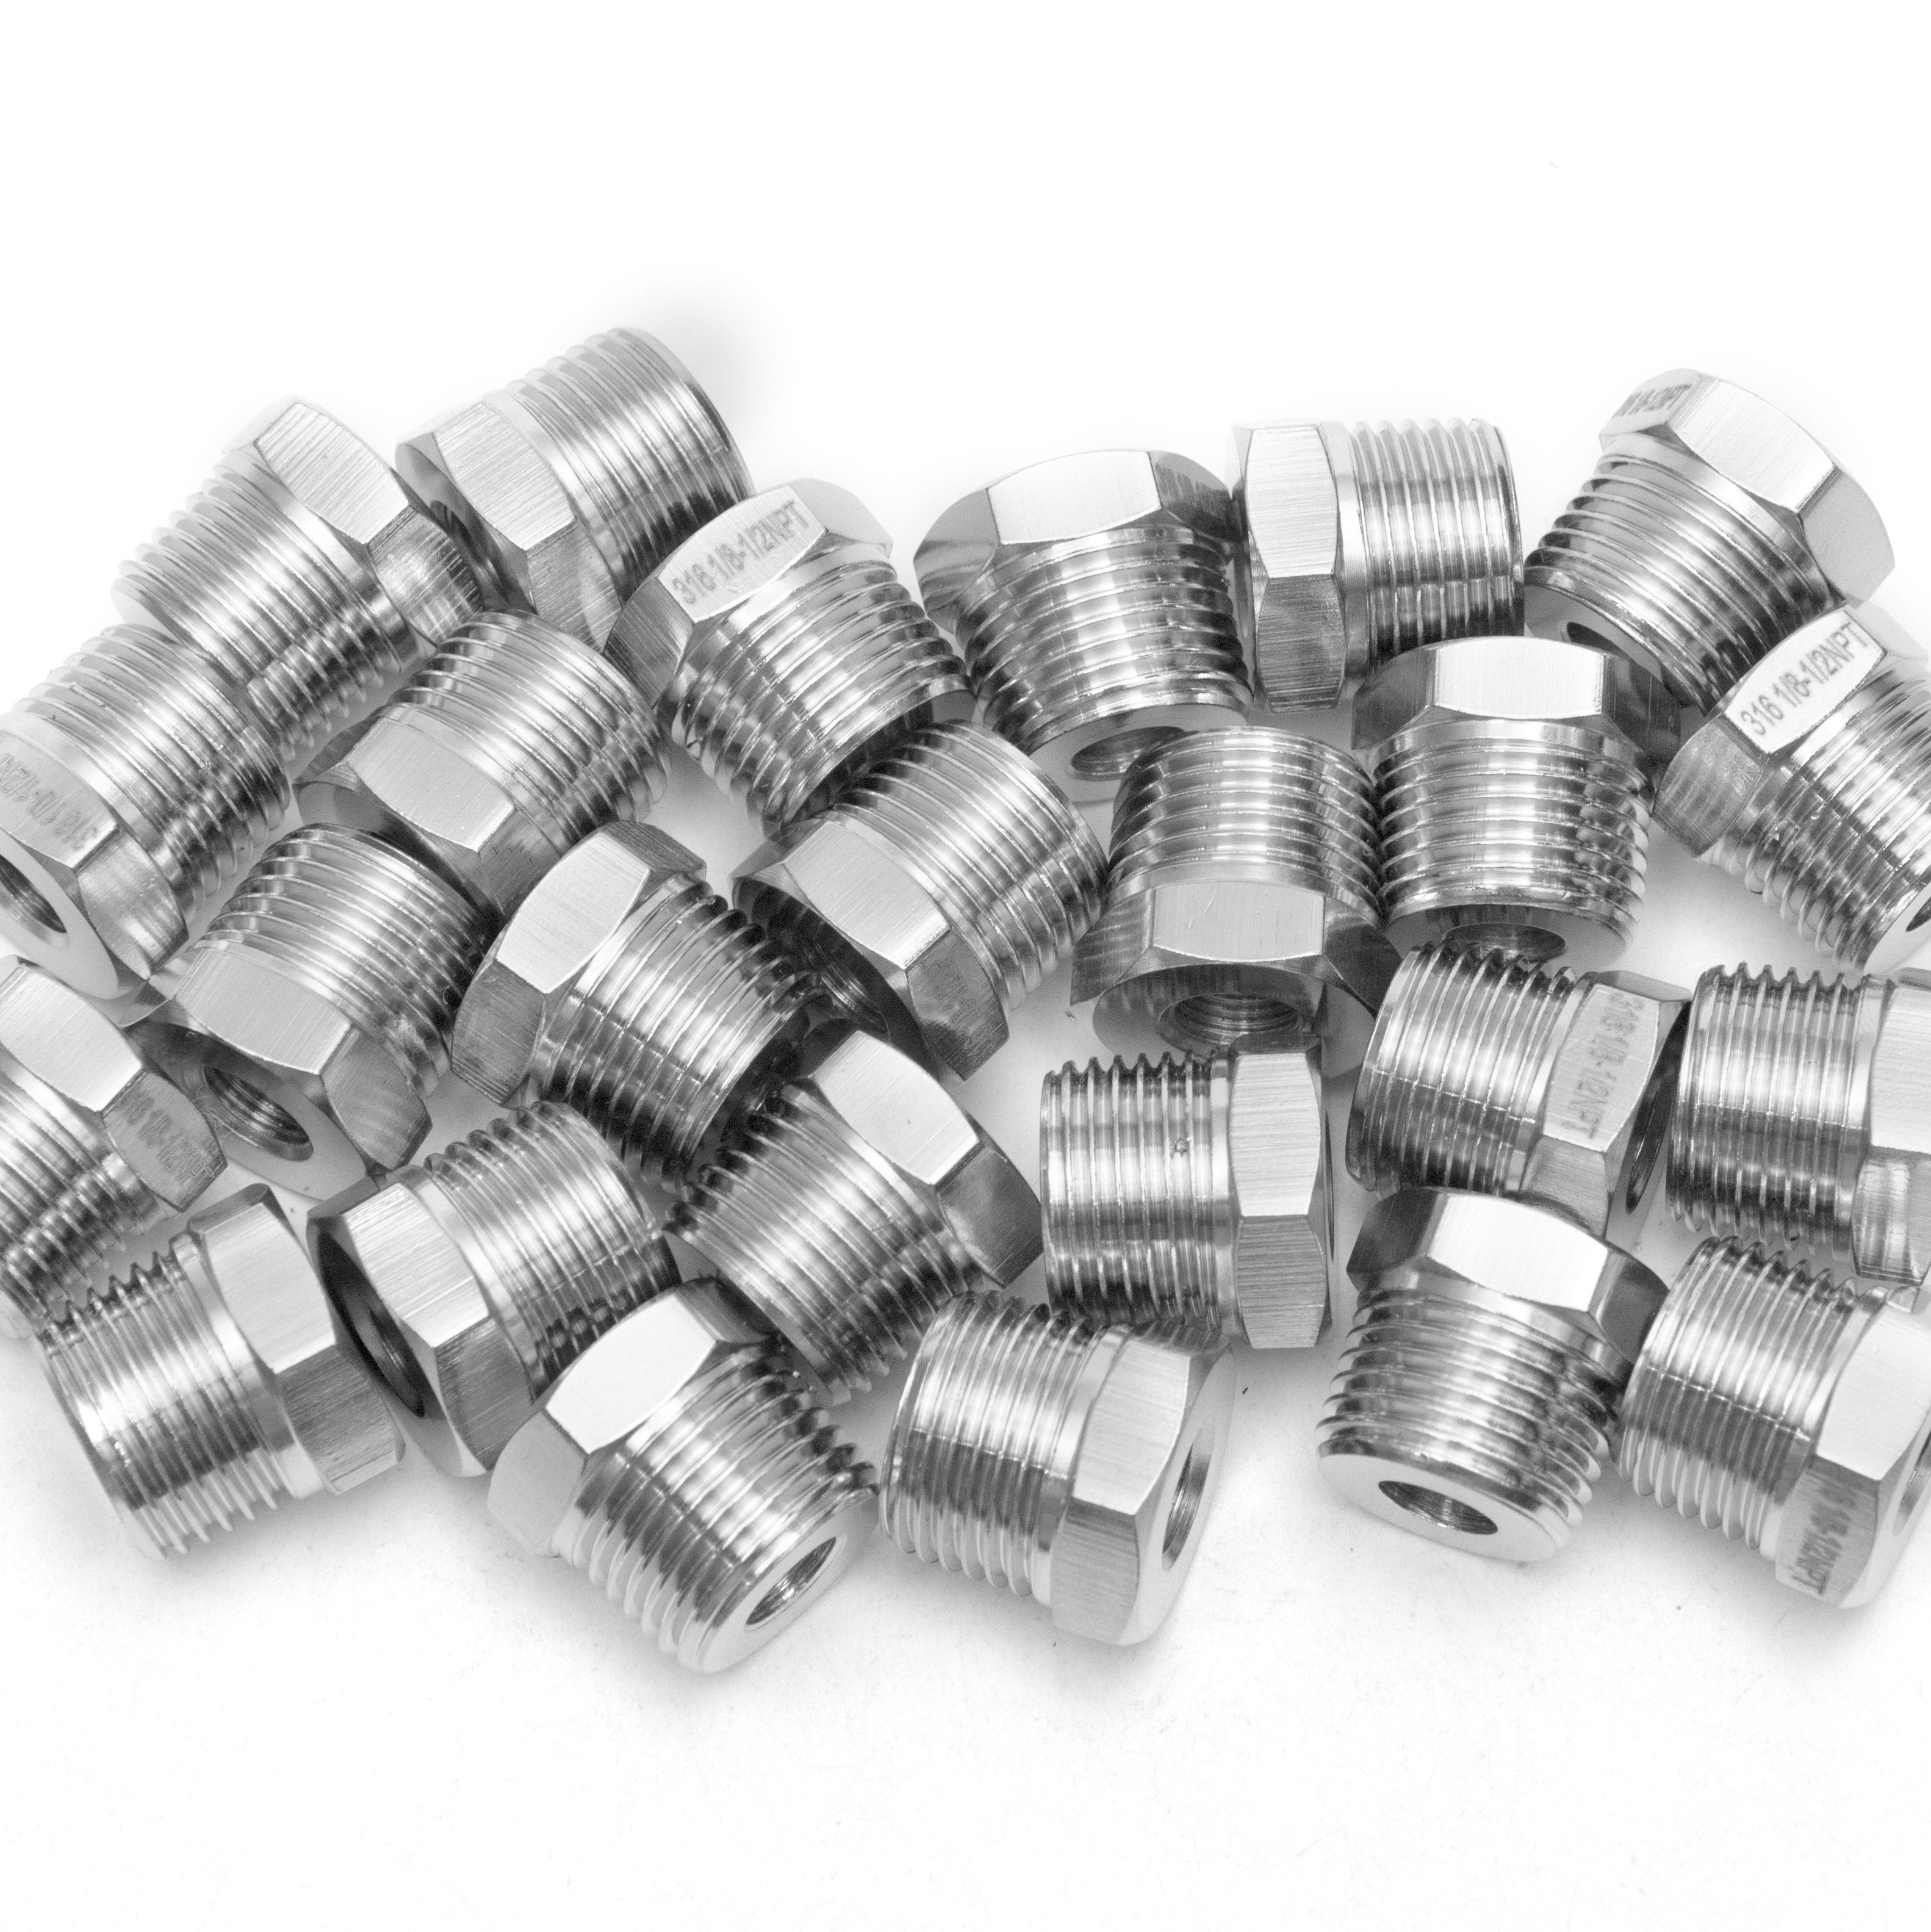 LTWFITTING Bar Production Stainless Steel 316 Pipe Hex Bushing Reducer Fittings 1/2 Inch Male x 1/8 Inch Female NPT Fuel Water Boat (Pack of 25)